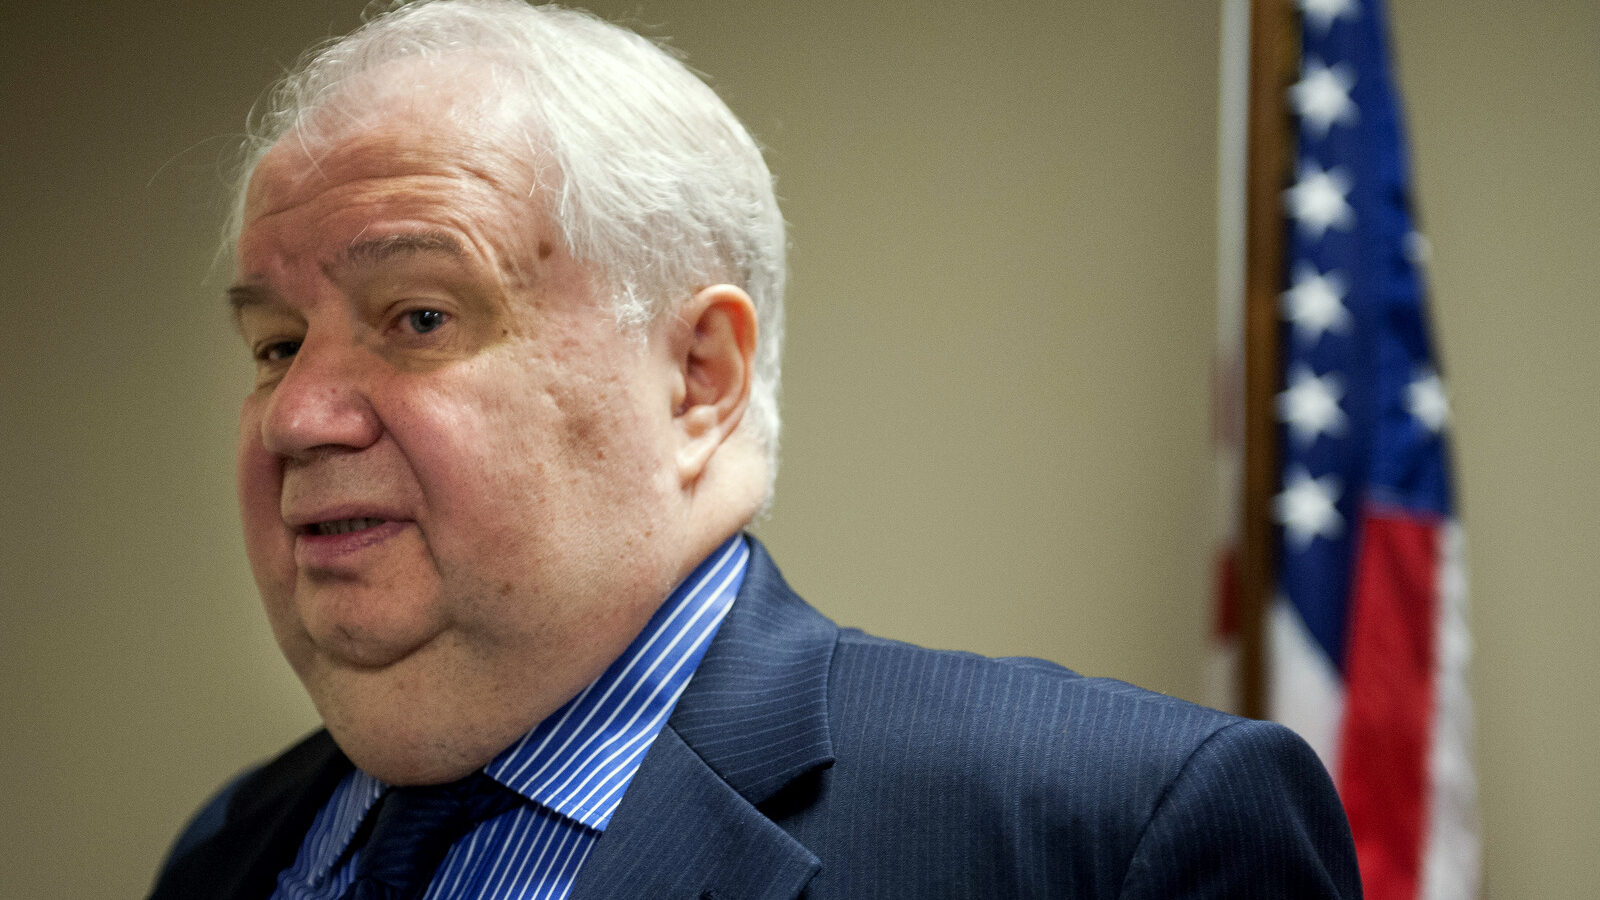 Sergey Kislyak, Russia's ambassador to the U.S. speaks with reporters at the Center for the National Interest in Washington. (AP/Cliff Owen)